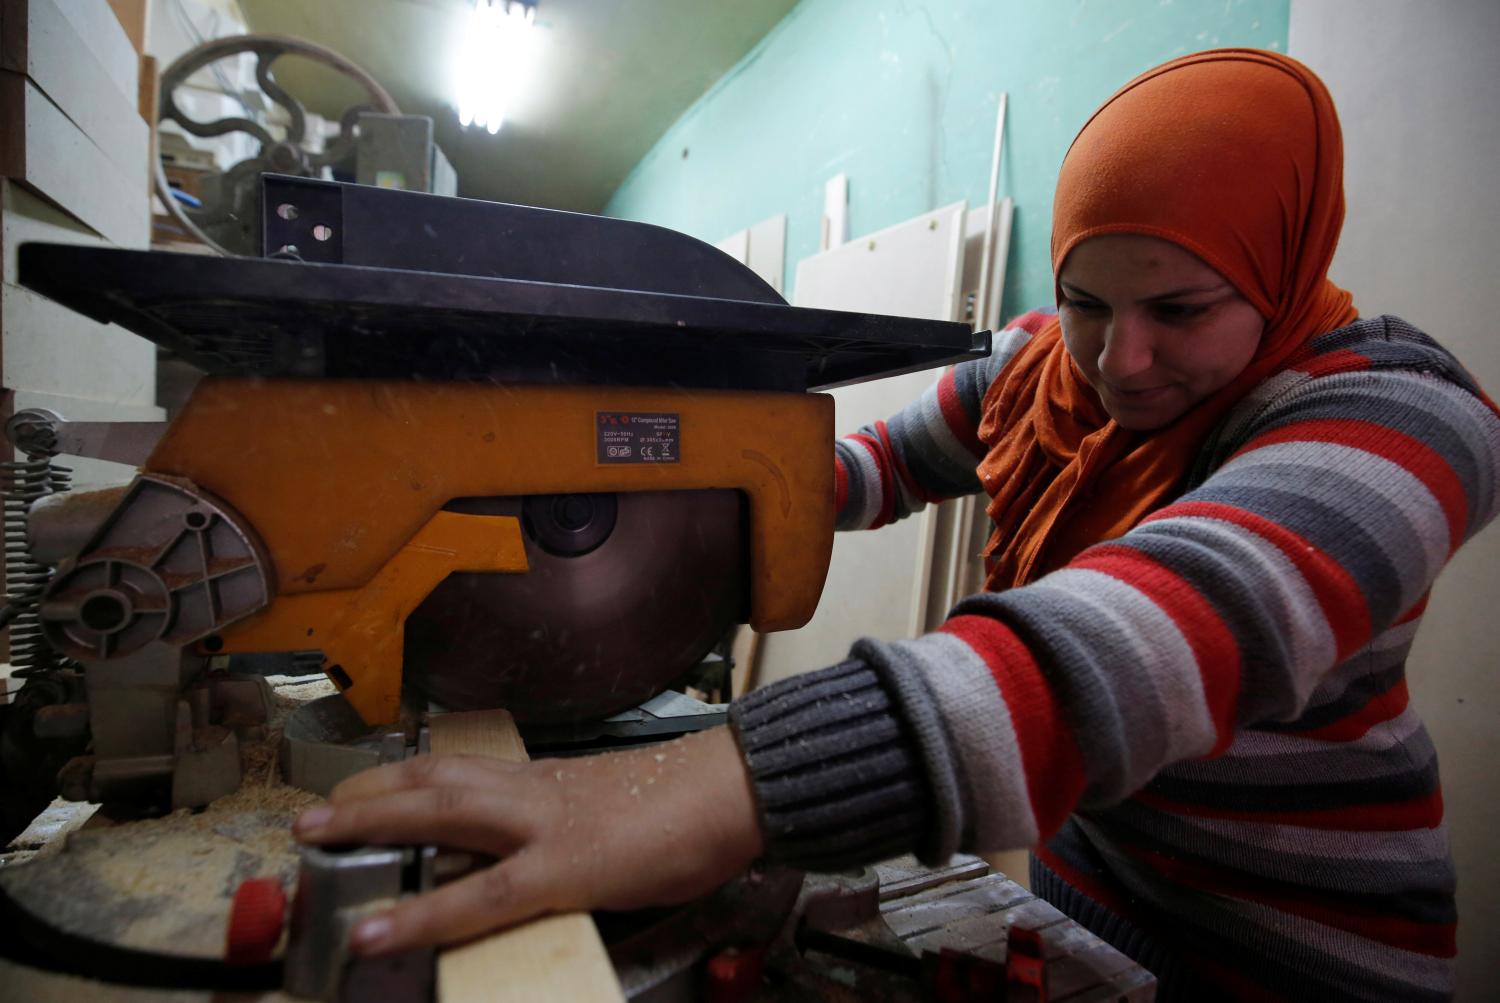 Asmaa Megahed, 30 years old, who's known as "Ousta Asmaa", a carpenter and designer, works inside her workshop in Cairo, Egypt February 27, 2017. Picture taken February 27, 2017. Ousta Asmaa, who started working in this profession by helping her husband in his workshop sends a message to women "That they shouldn't pay attention to those who comment negatively on the work traditionally for men, forget them. Women can do any business no matter how difficult. Do anything you love, do not give up for anyone who wants to discourage you, there are many men saying that women cant do anything just "cooking and cooking", but women can do the impossible". REUTERS/Amr Abdallah Dalsh - RTS11Z8L